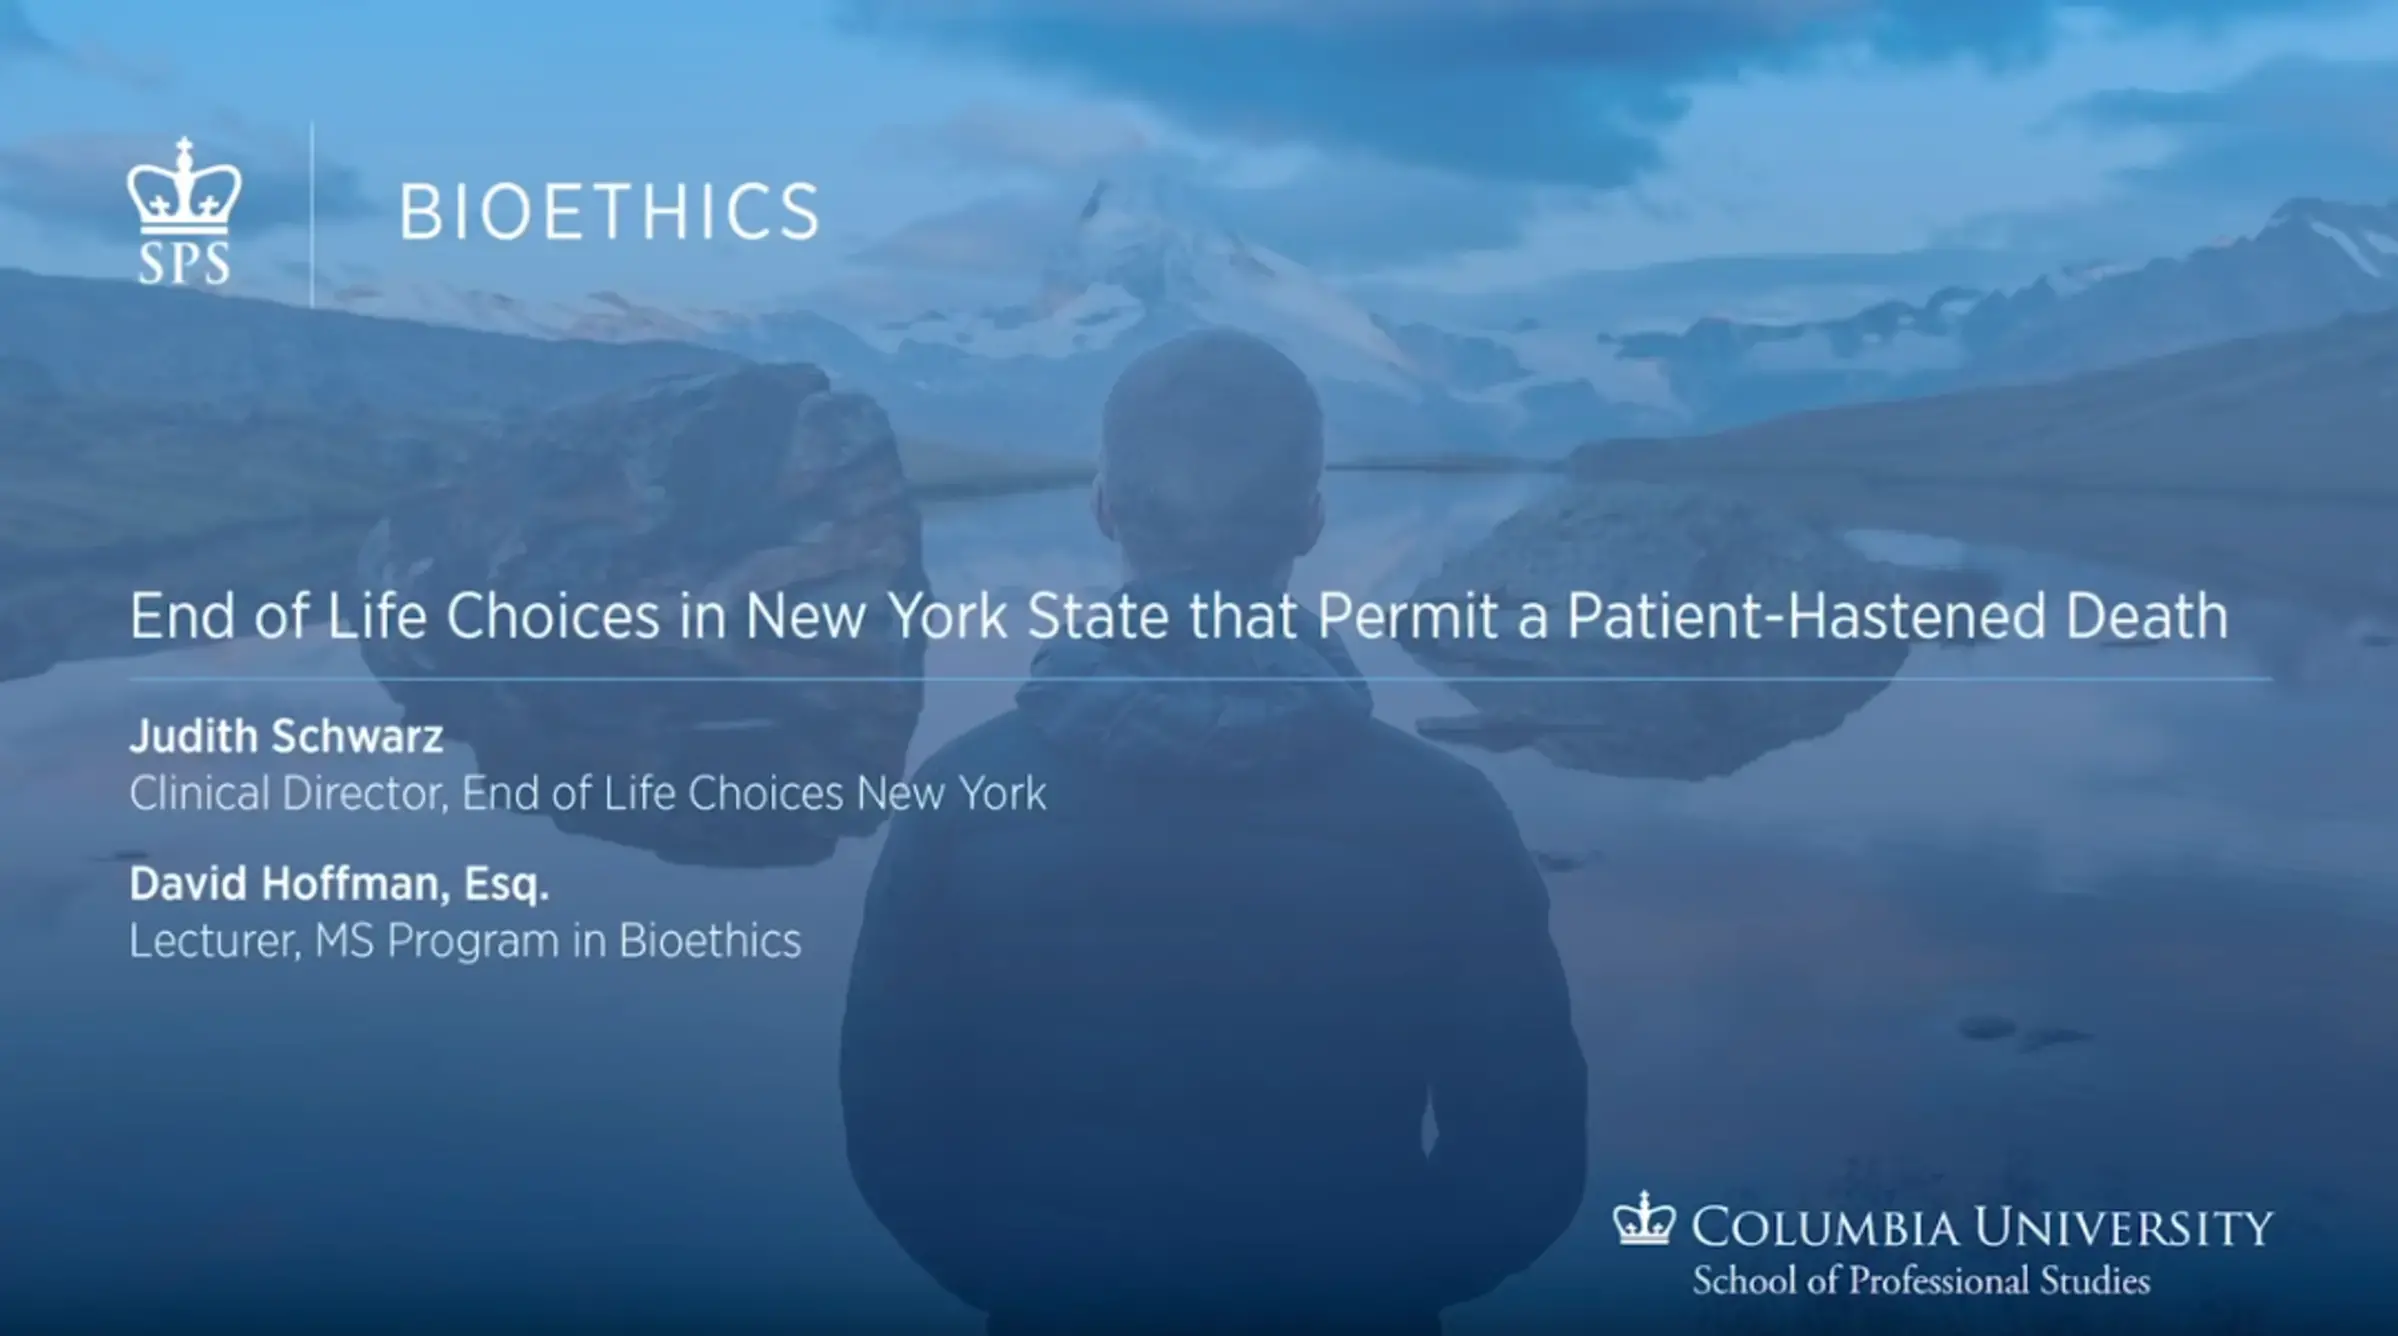 End of Life Choices in New York State that Permit a Patient-Hastened Death